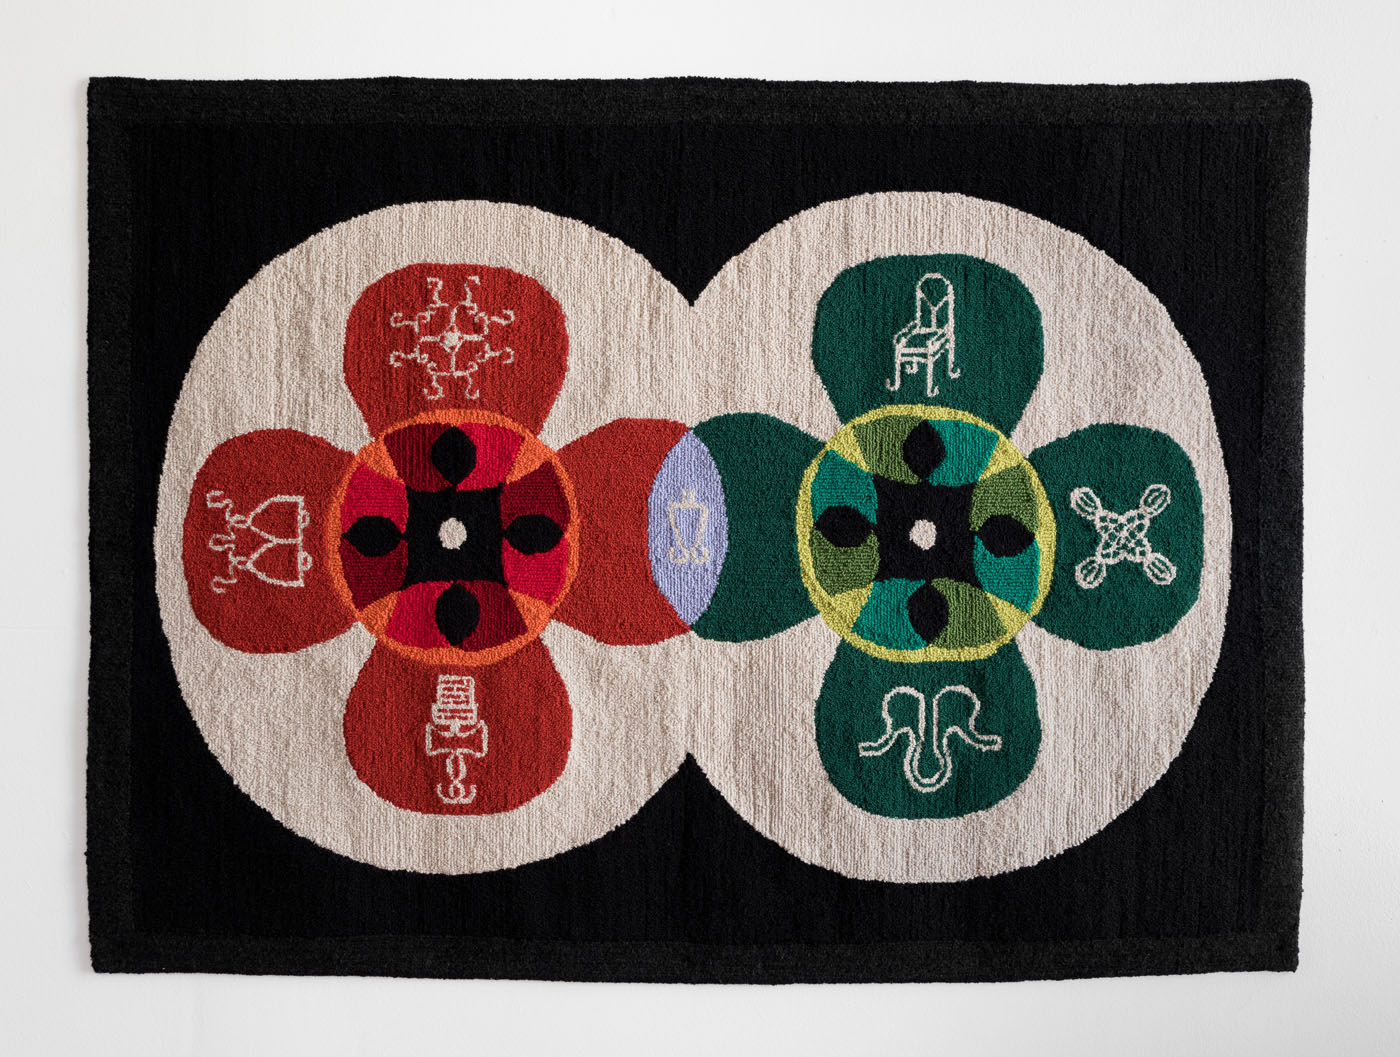 A textured rug with a black background and two intersecting white circles. Inside each circle four-lobed flower patterns (one green, one red) display a variety of symbols.